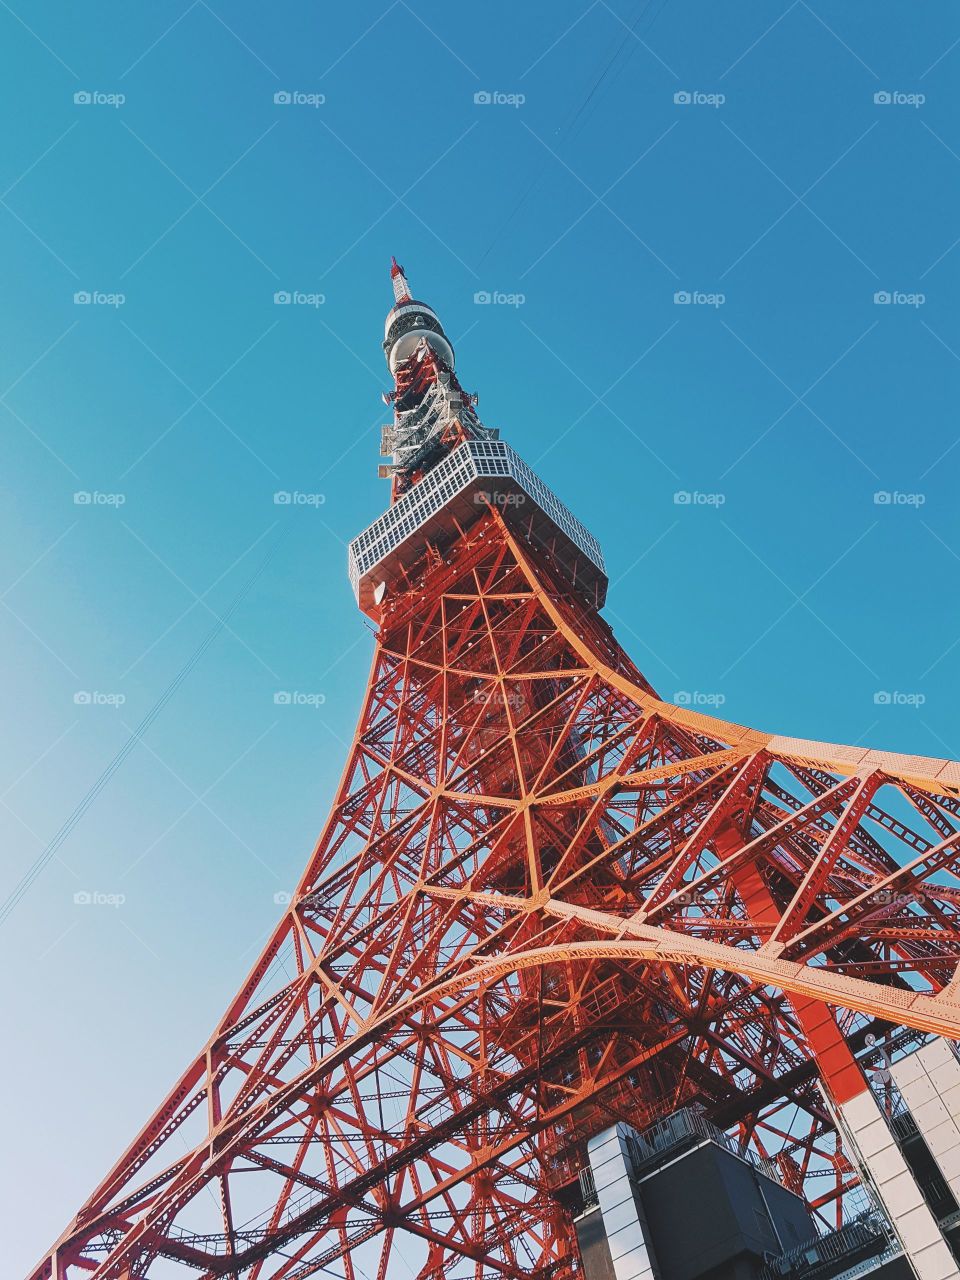 tokyo tower red tall blue sky japan city life tourist travel